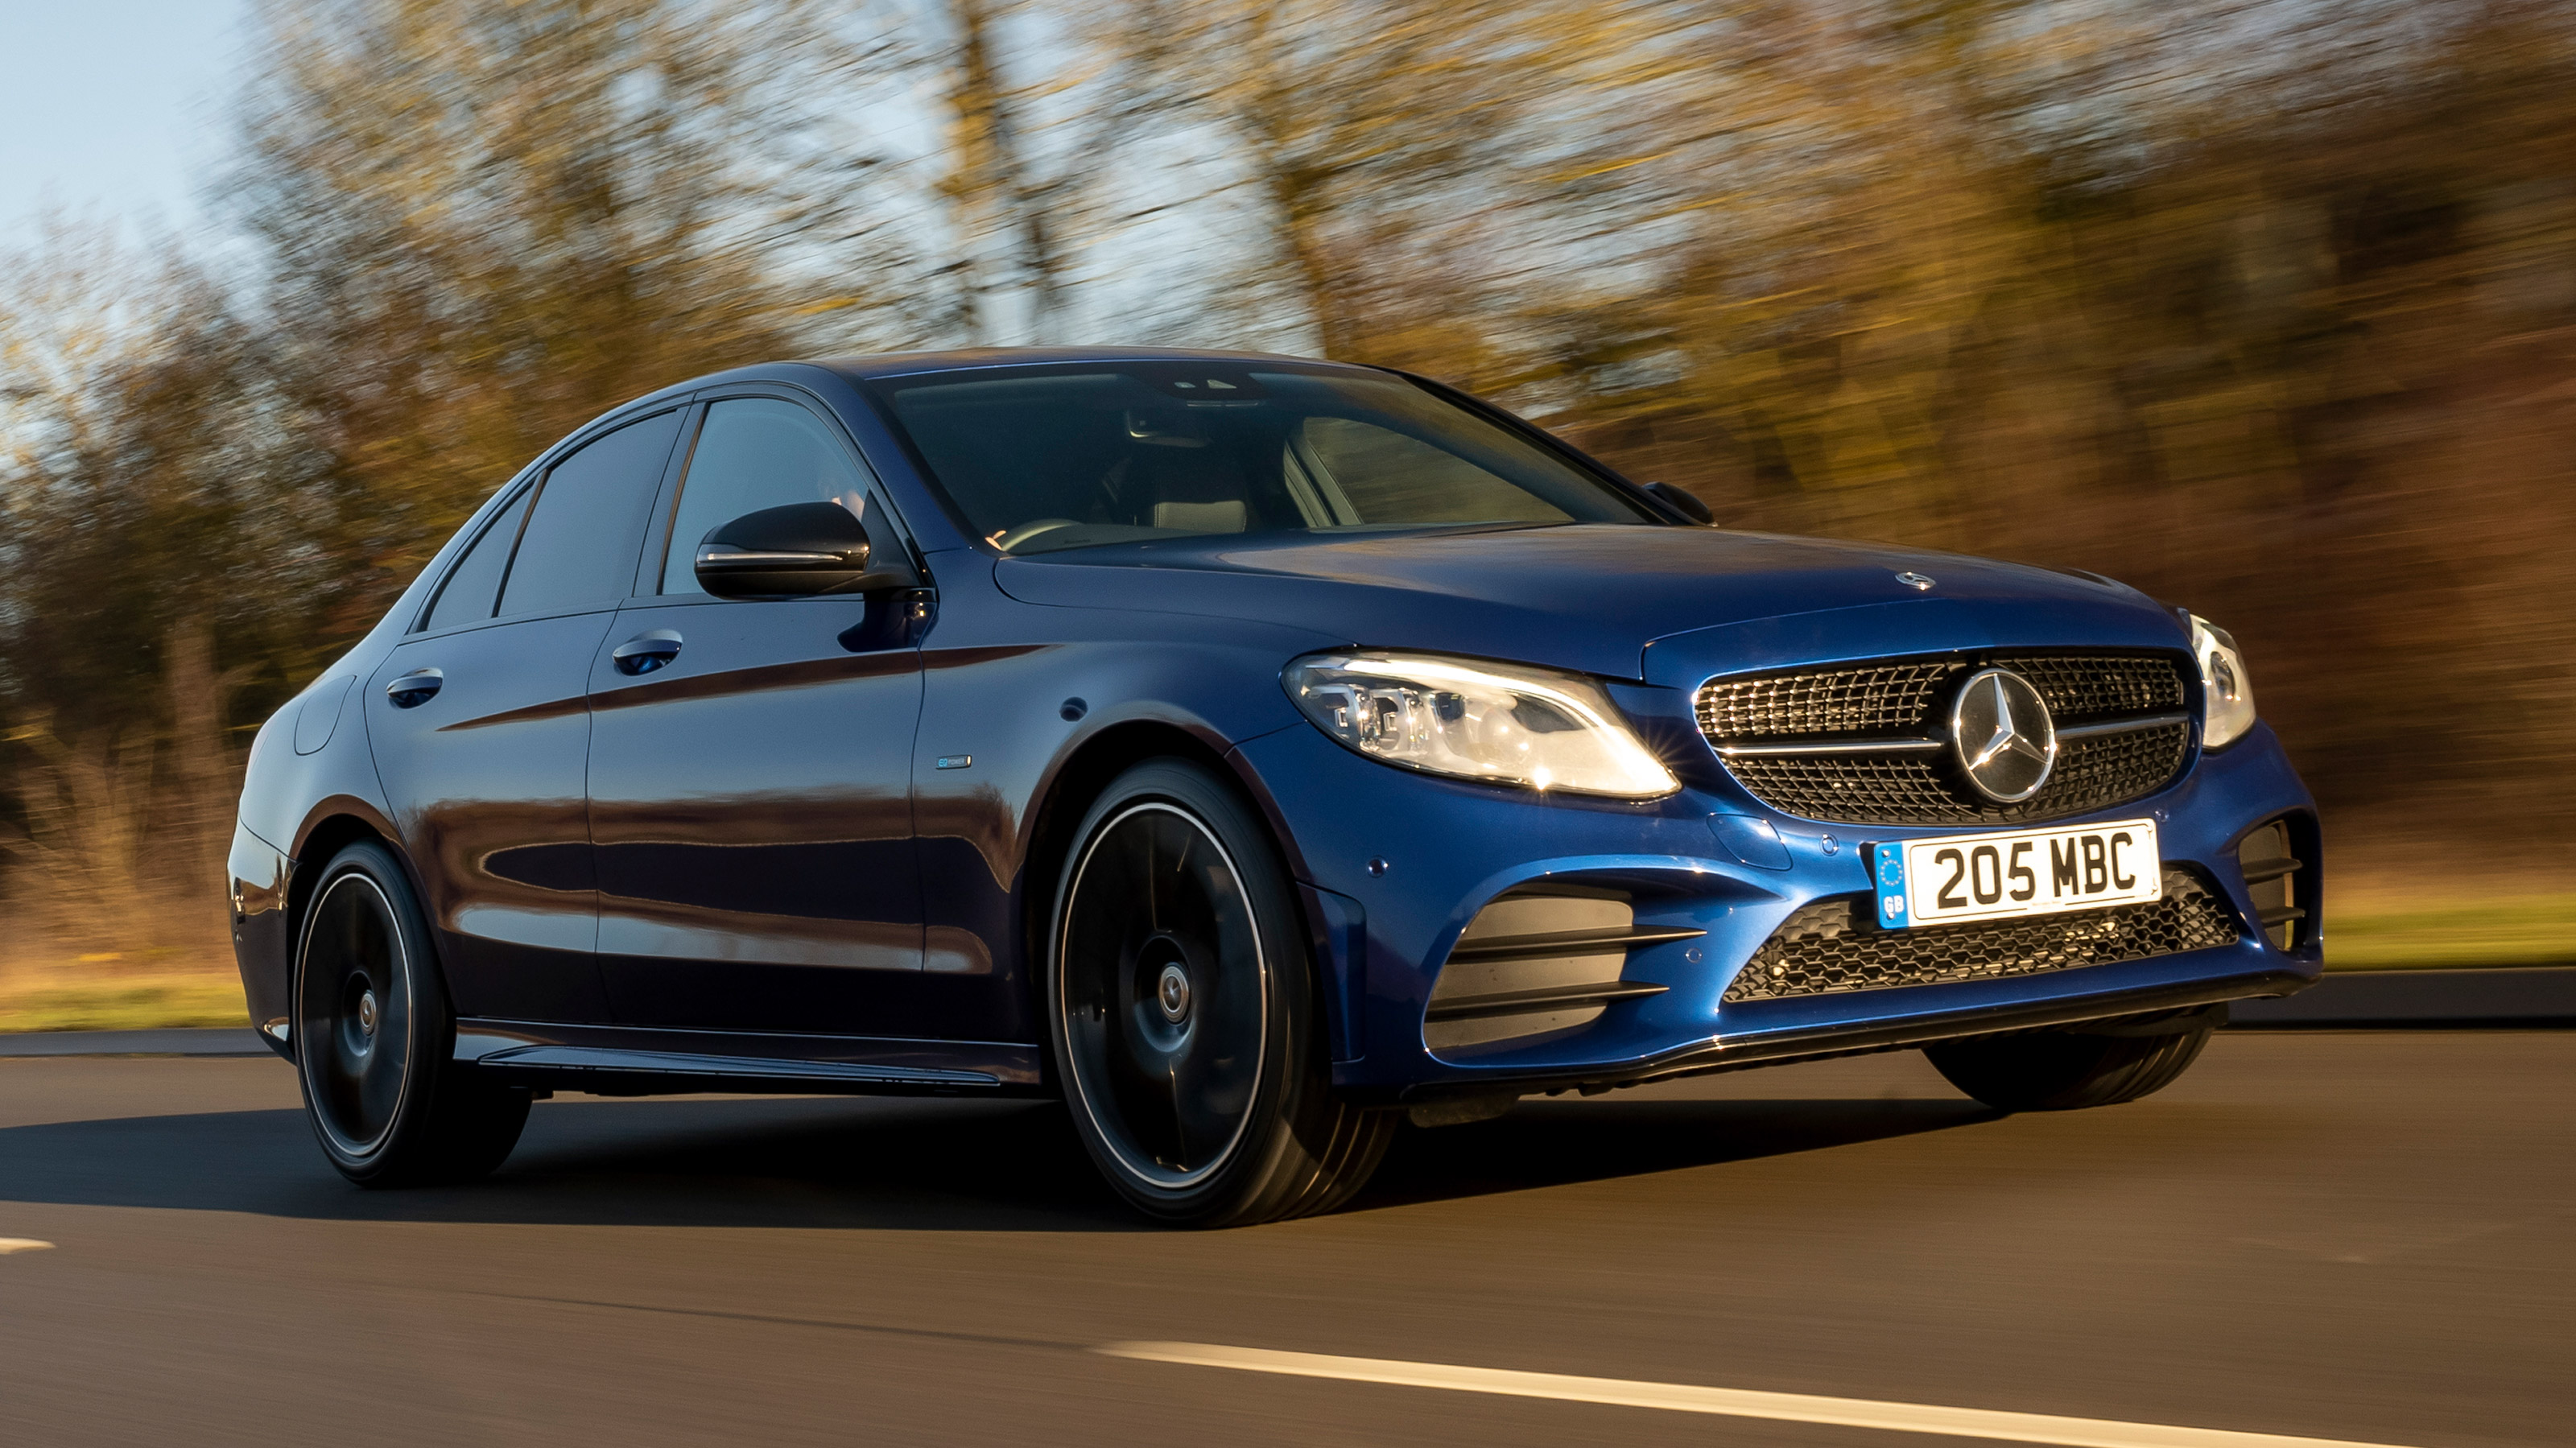 Used Mercedes C-Class saloon review: 2014-2021 (Mk4)